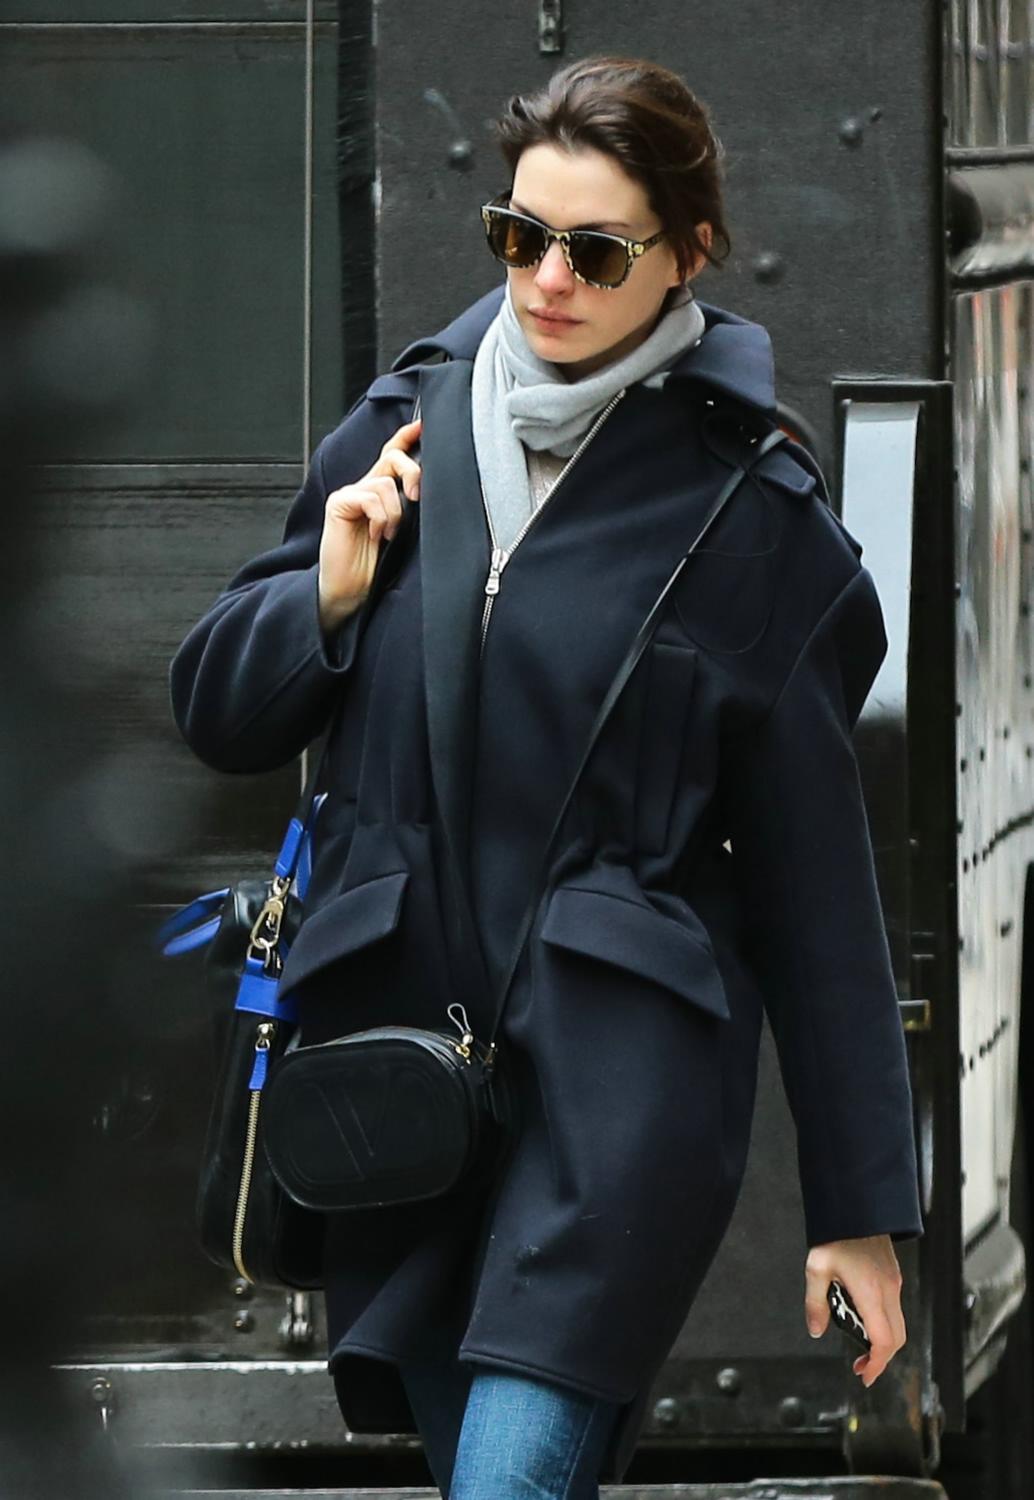 Anne Hathaway Out in NYC – Celeb Donut